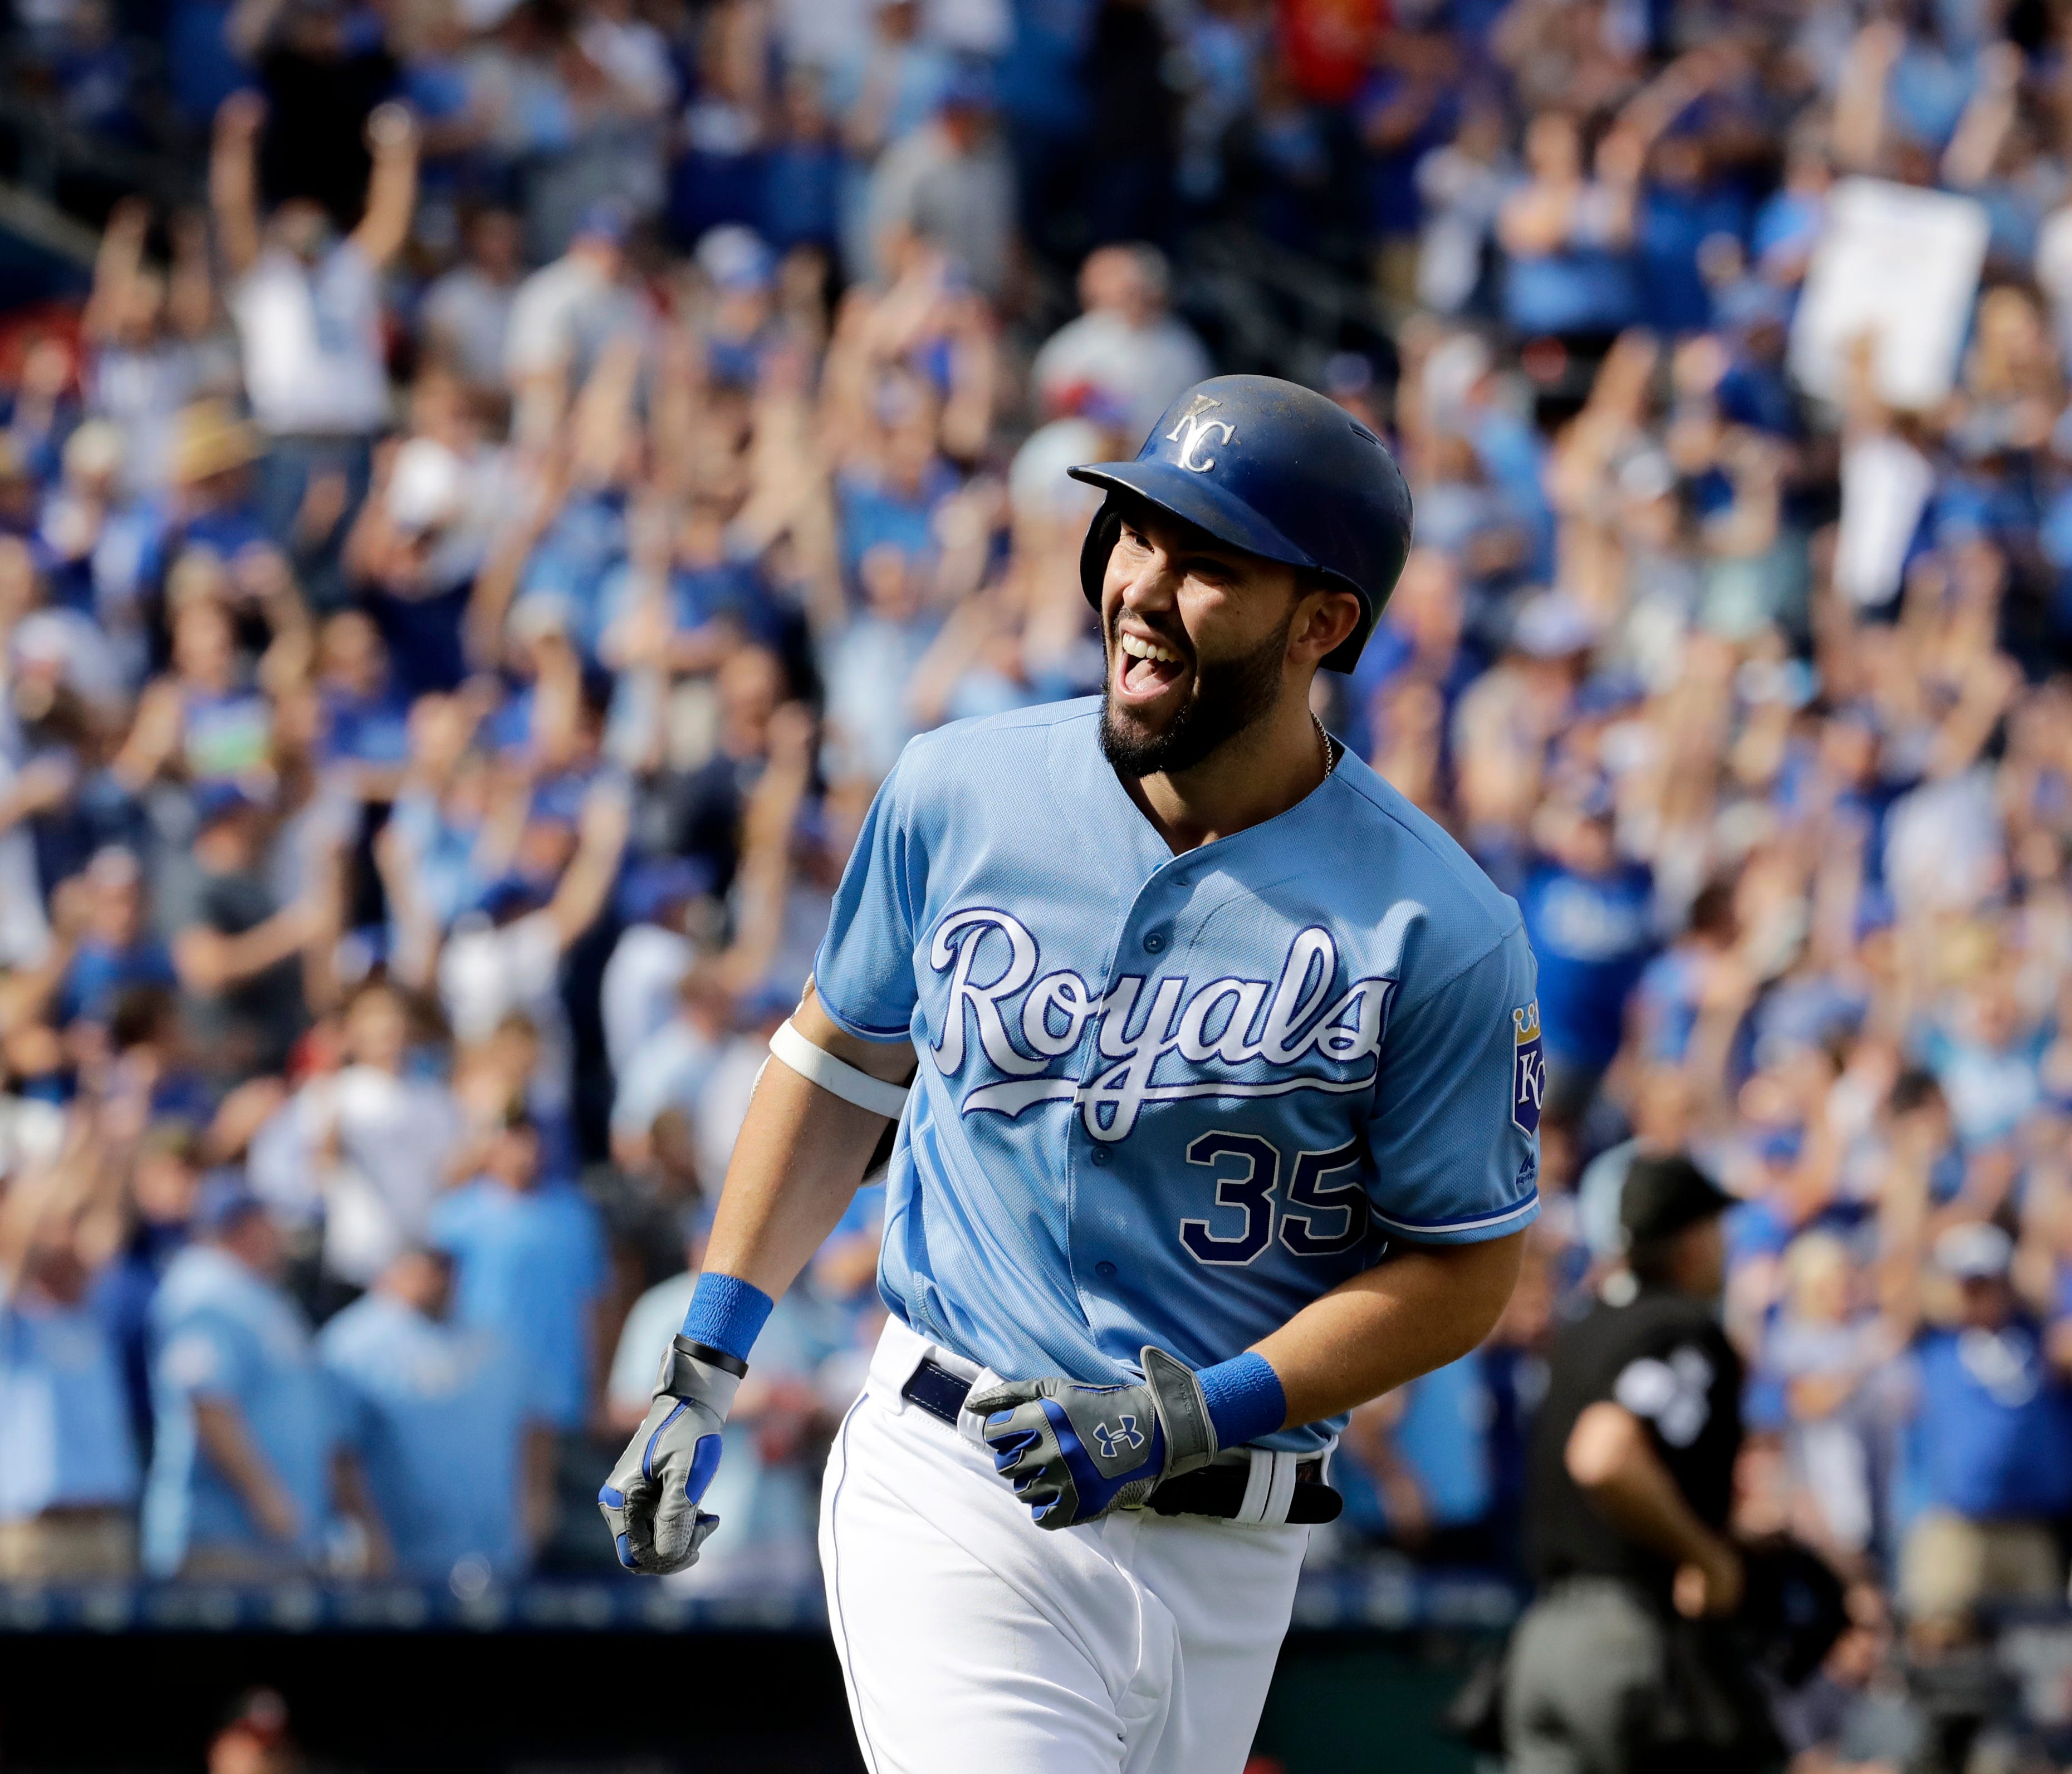 Kansas City Royals' Eric Hosmer celebrates after hitting a solo home run during the first inning of a baseball game against the Arizona Diamondbacks Sunday, Oct. 1, 2017, in Kansas City, Mo. (AP Photo/Charlie Riedel) ORG XMIT: MOCR104